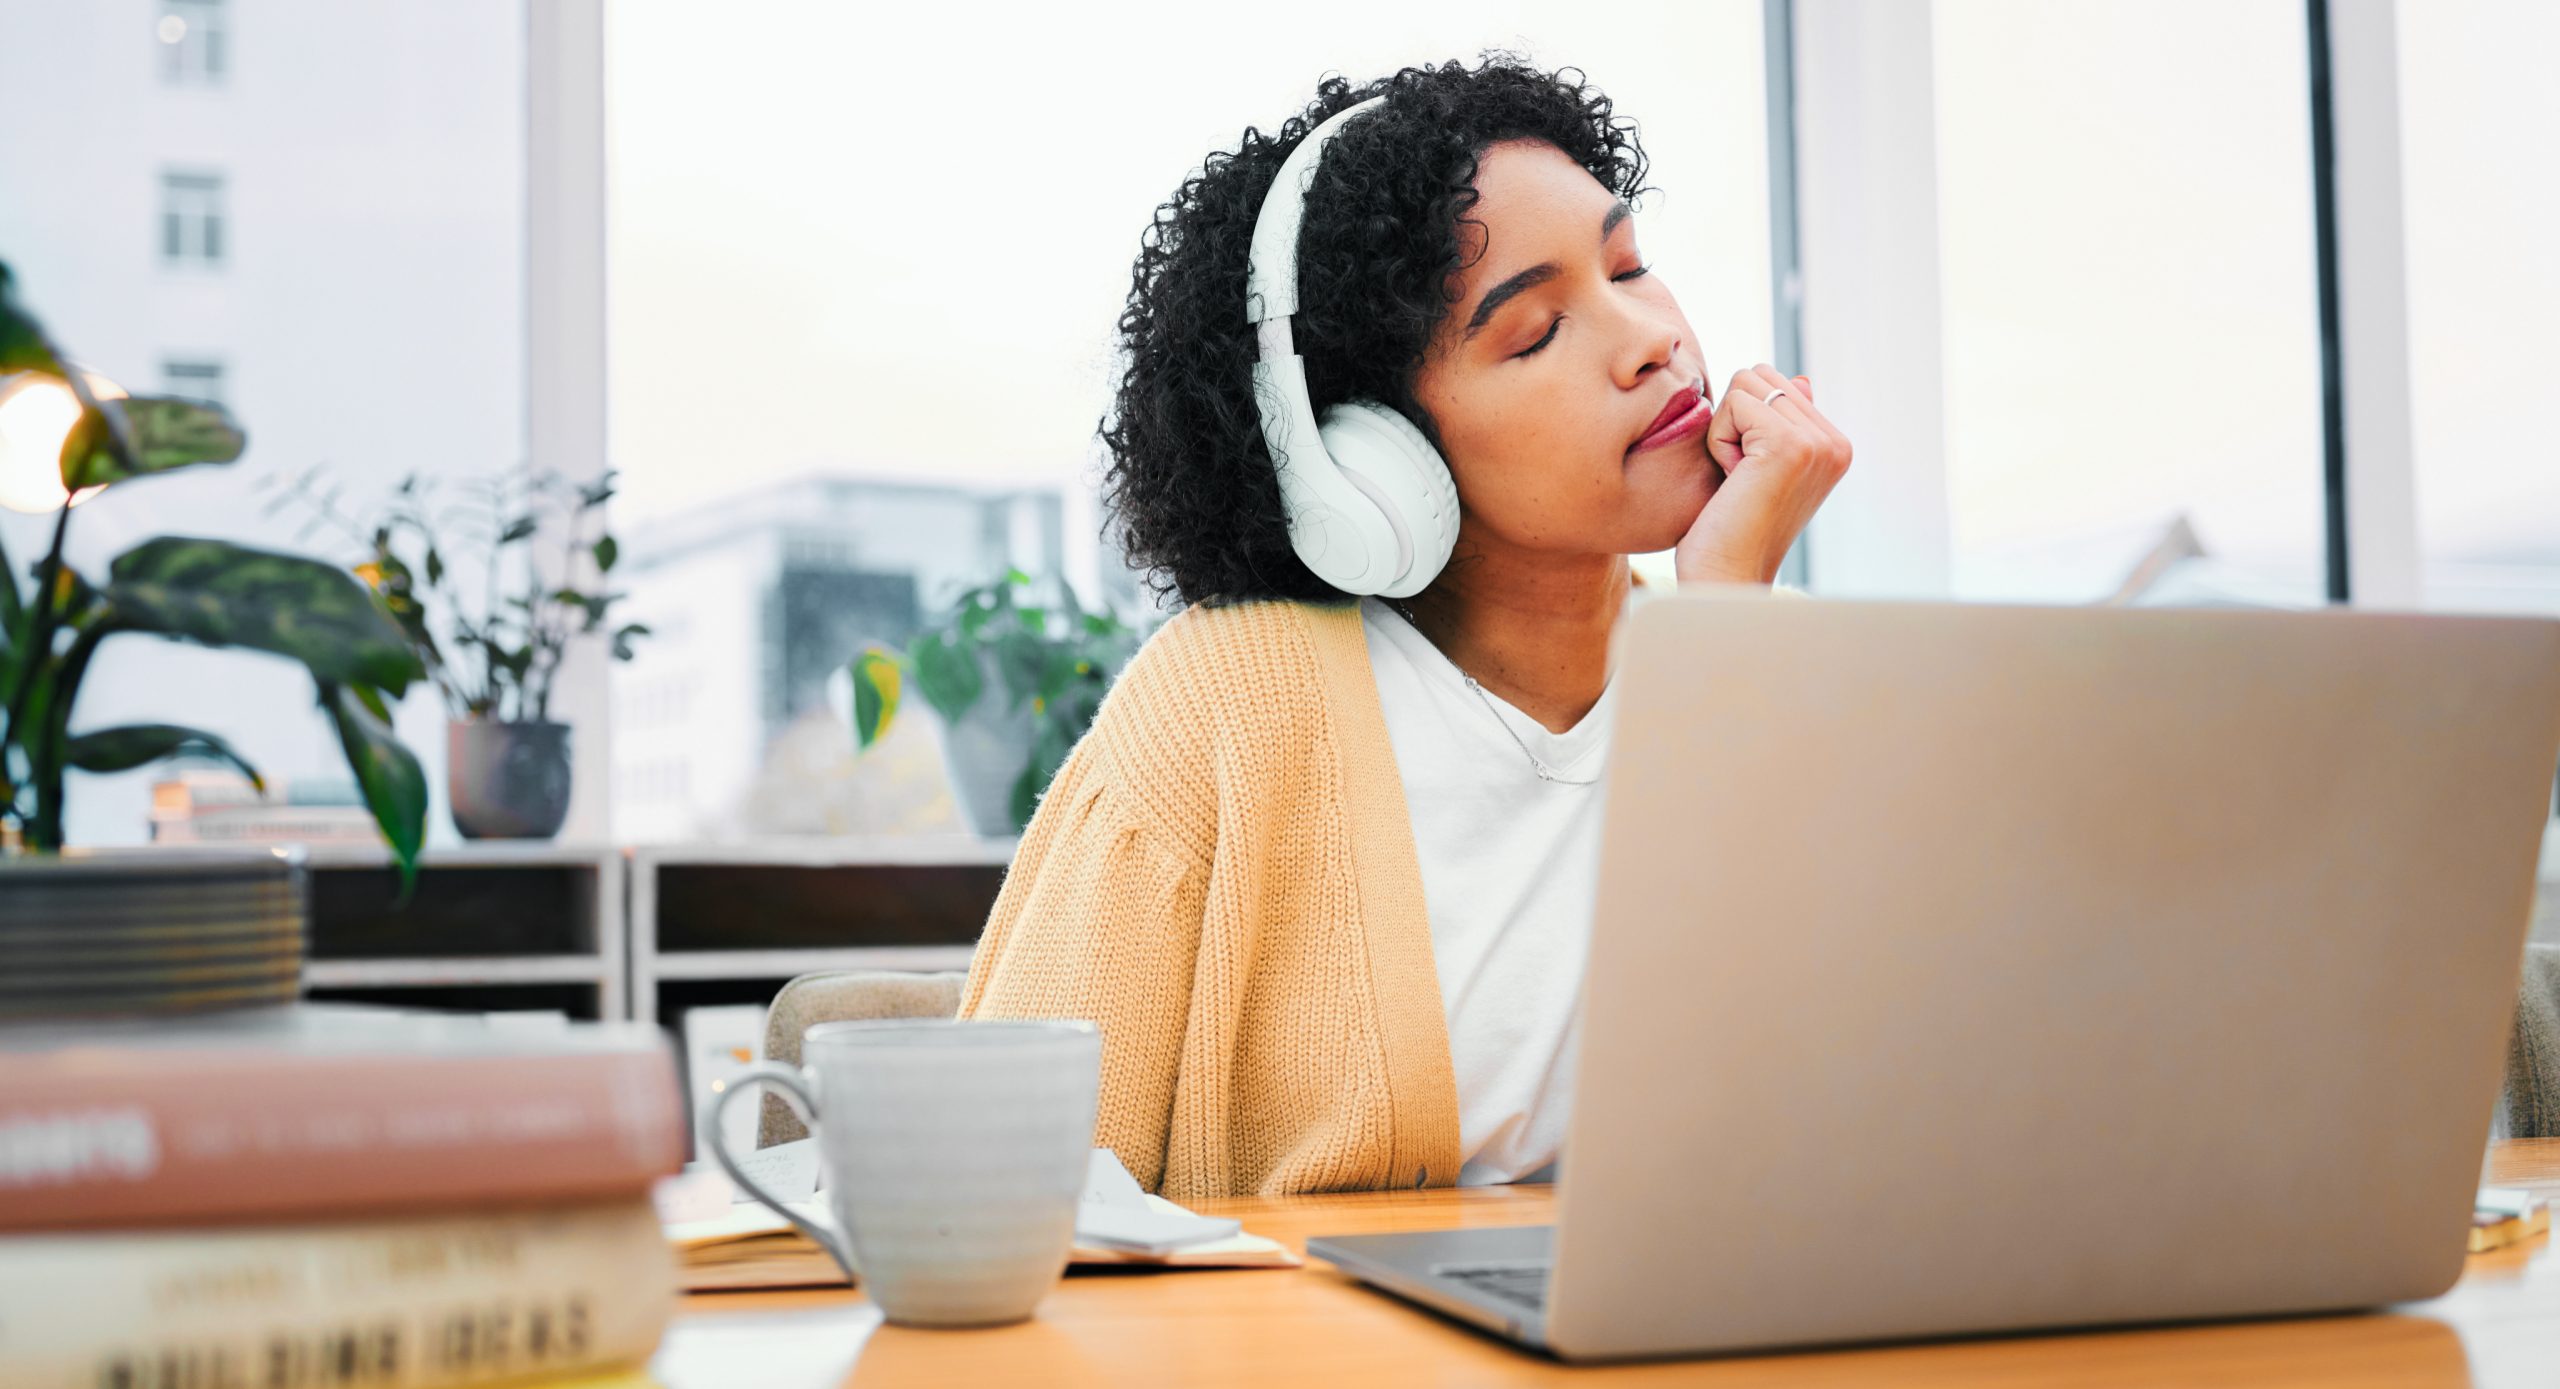 Calm woman sitting at a desk in a bright office with closed eyes earing headphones.